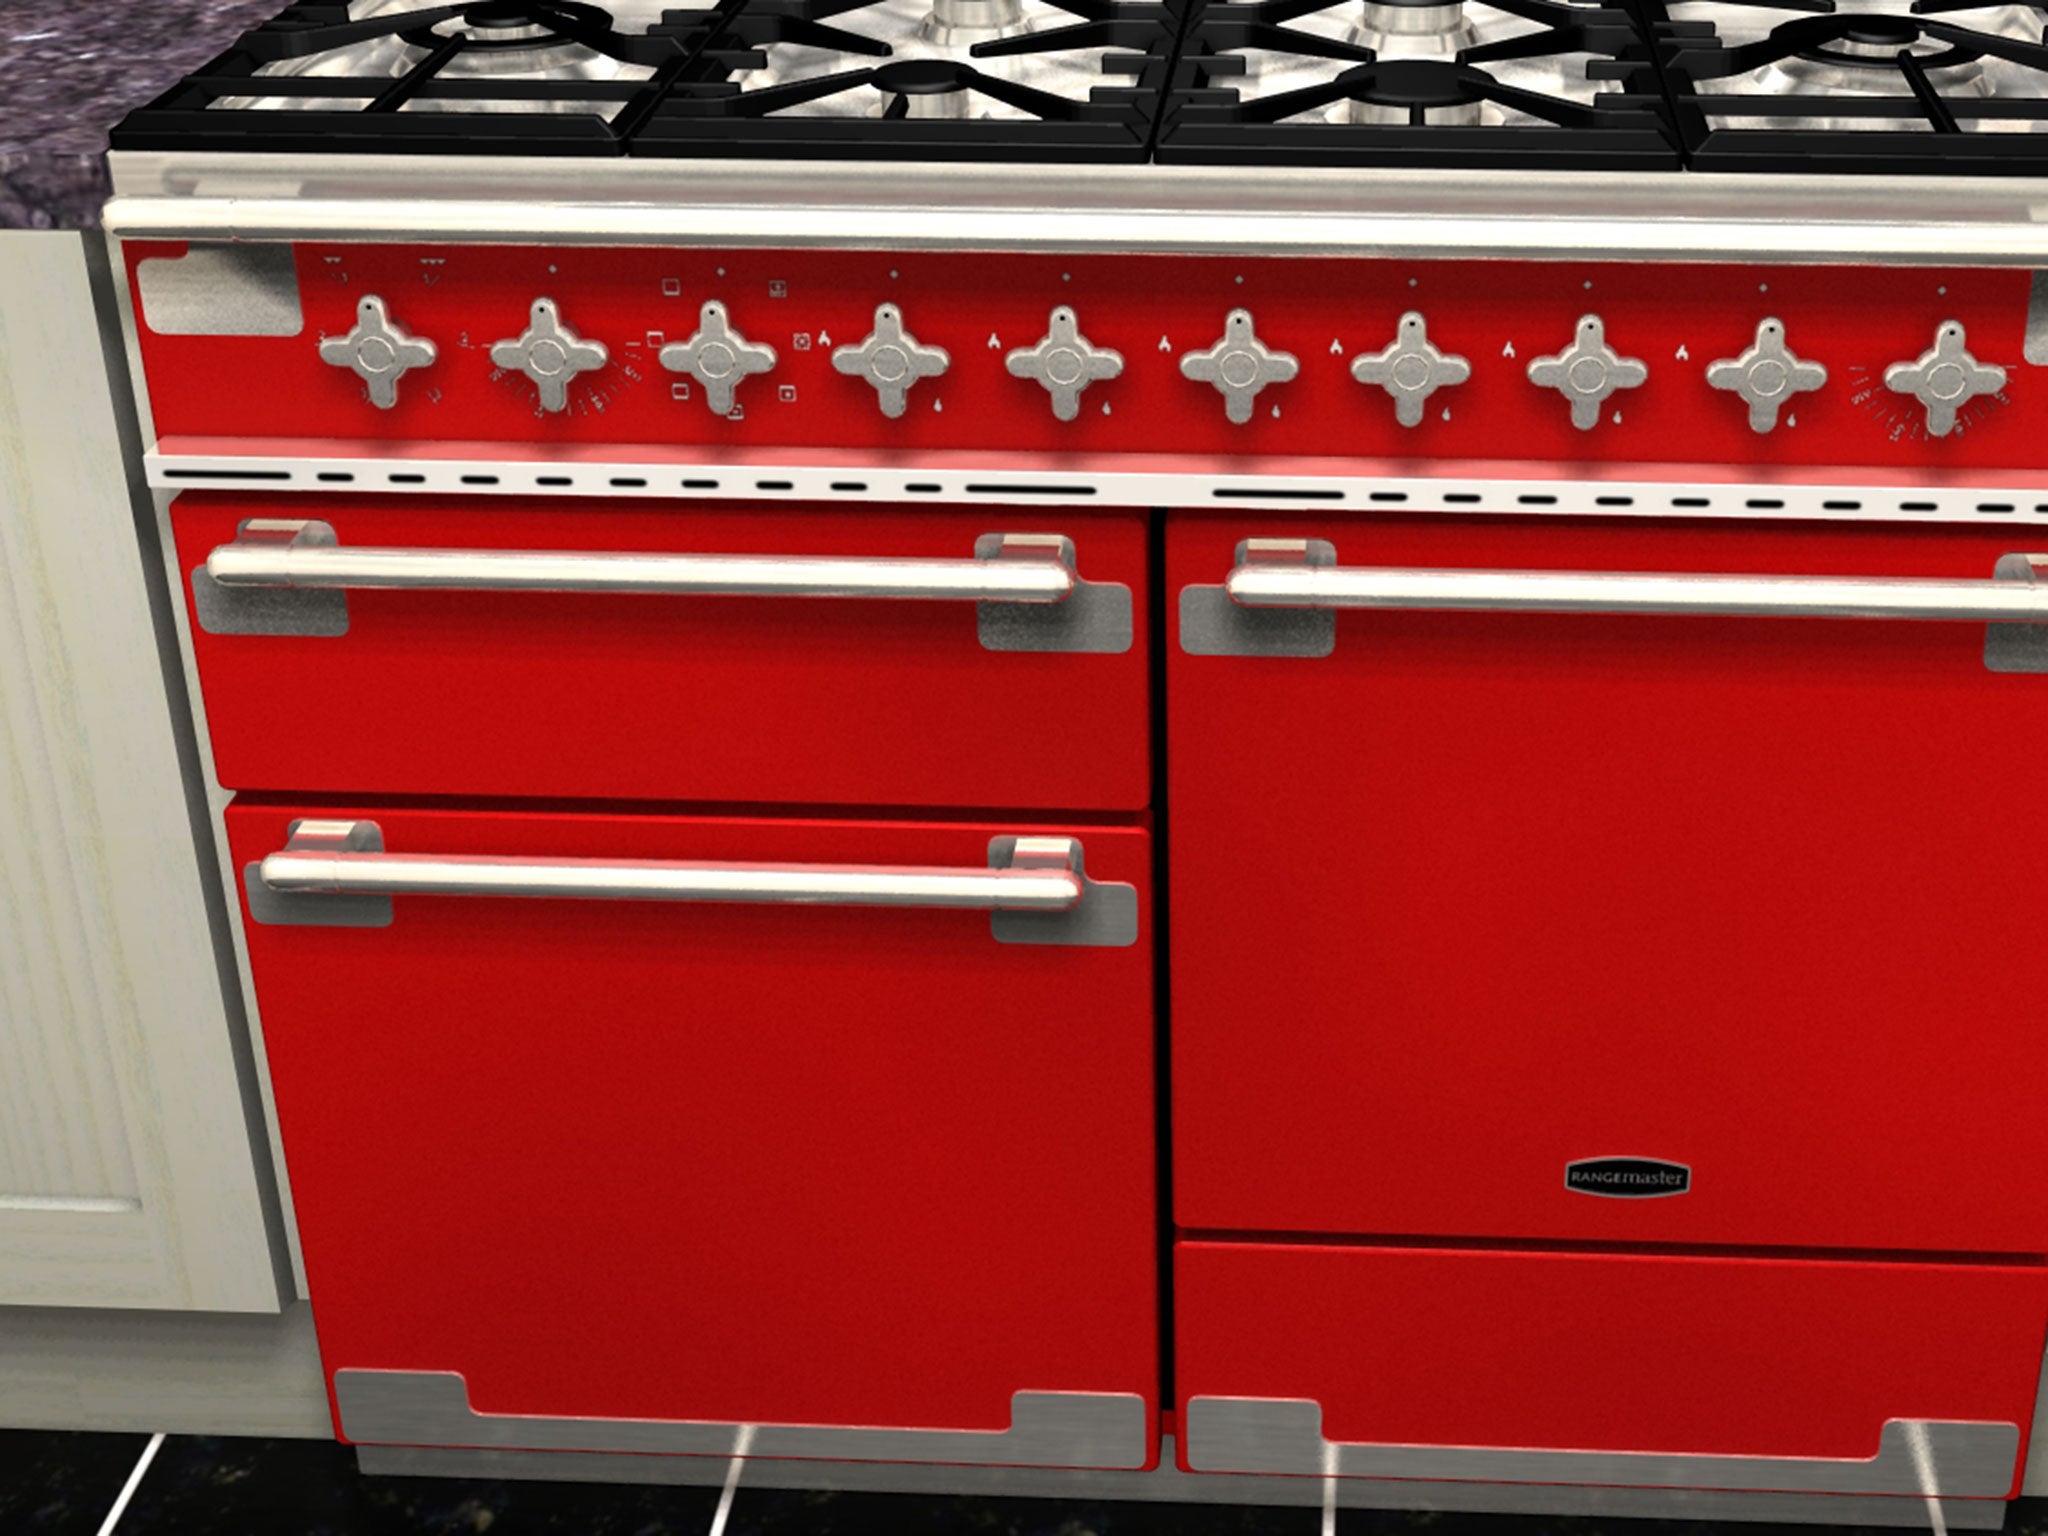 One in ten people surveyed said they had a range cooker in their home